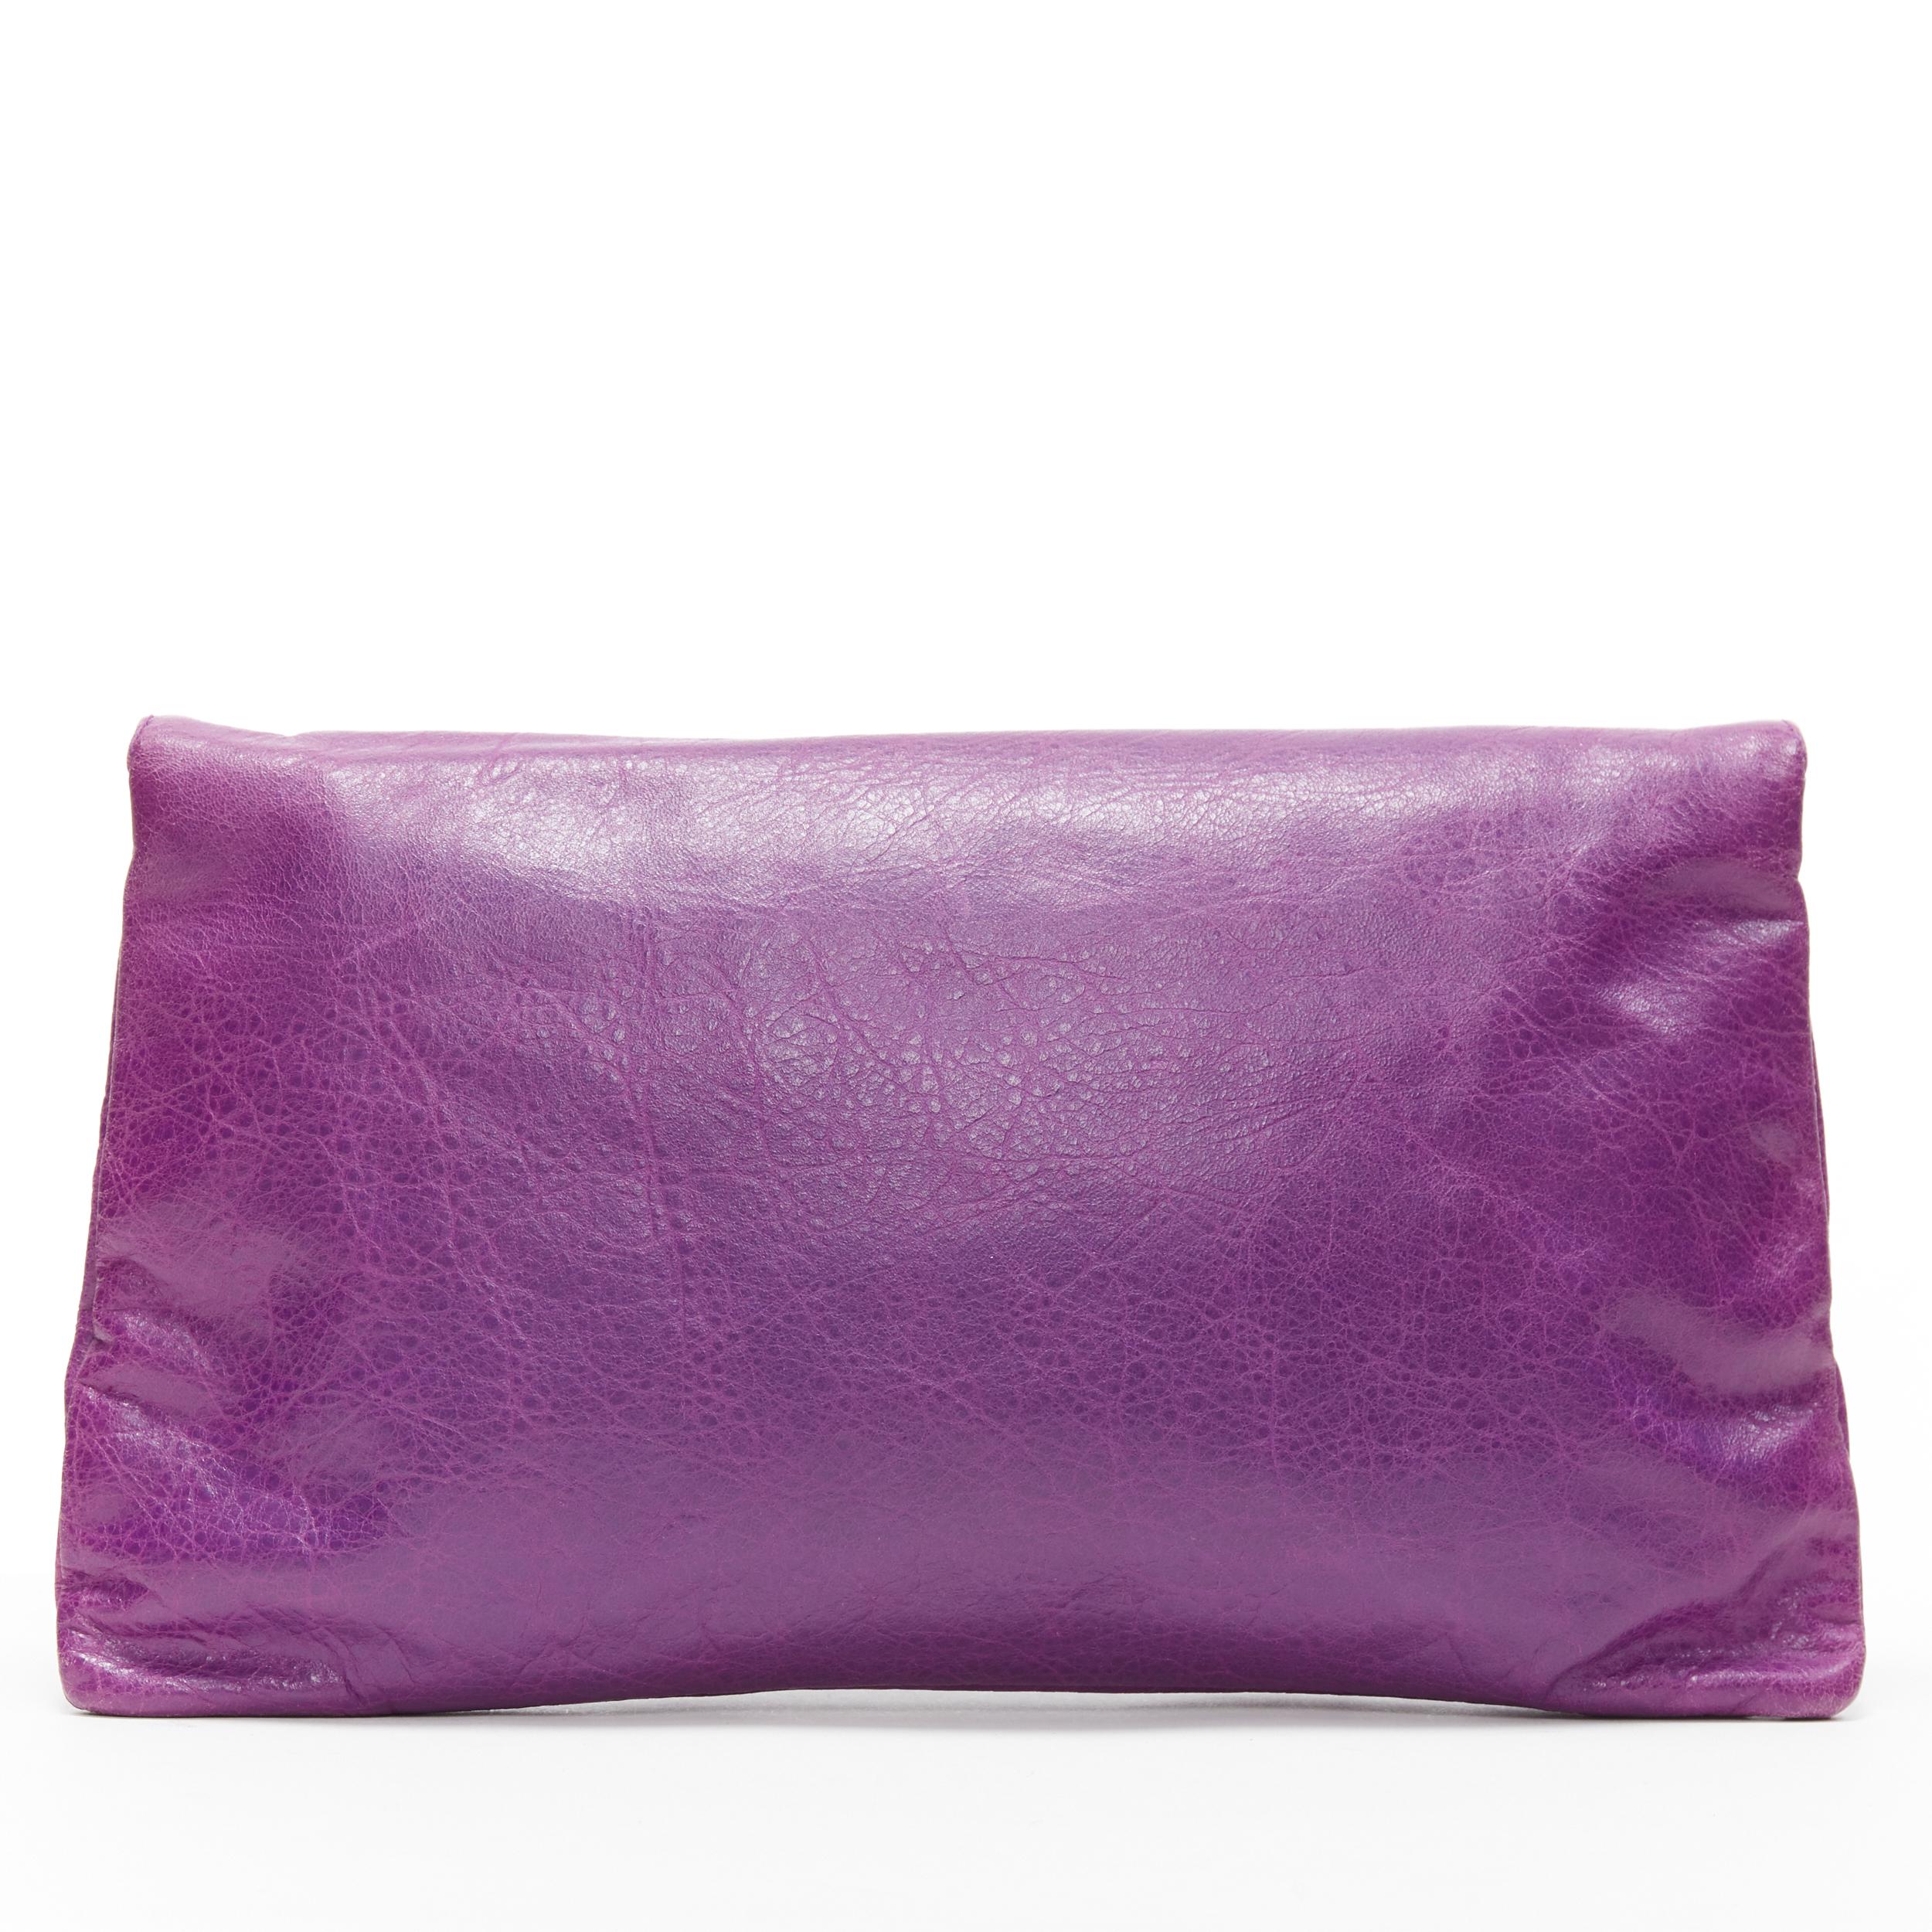 BALENCIAGA Motocross Classic purple leather brass stud flap foldover clutch bag
Brand: Balenciaga
Model Name / Style: Motocross Classic
Material: Leather
Color: Purple
Pattern: Solid
Closure: Magnetic
Extra Detail:
Made in: Italy

CONDITION: